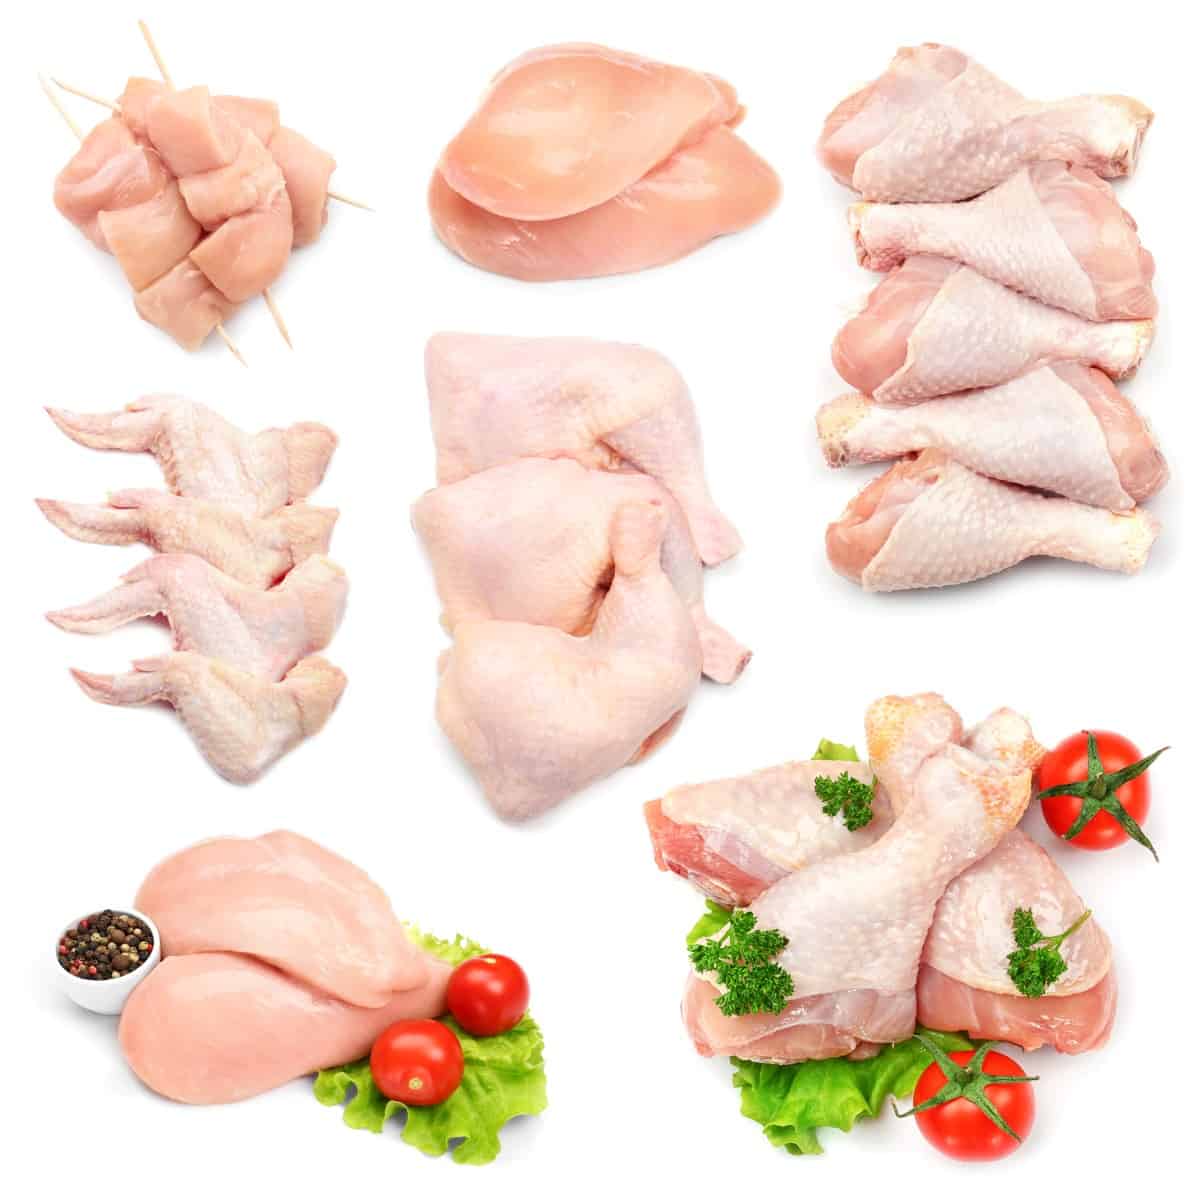 Different parts of raw chicken on white background